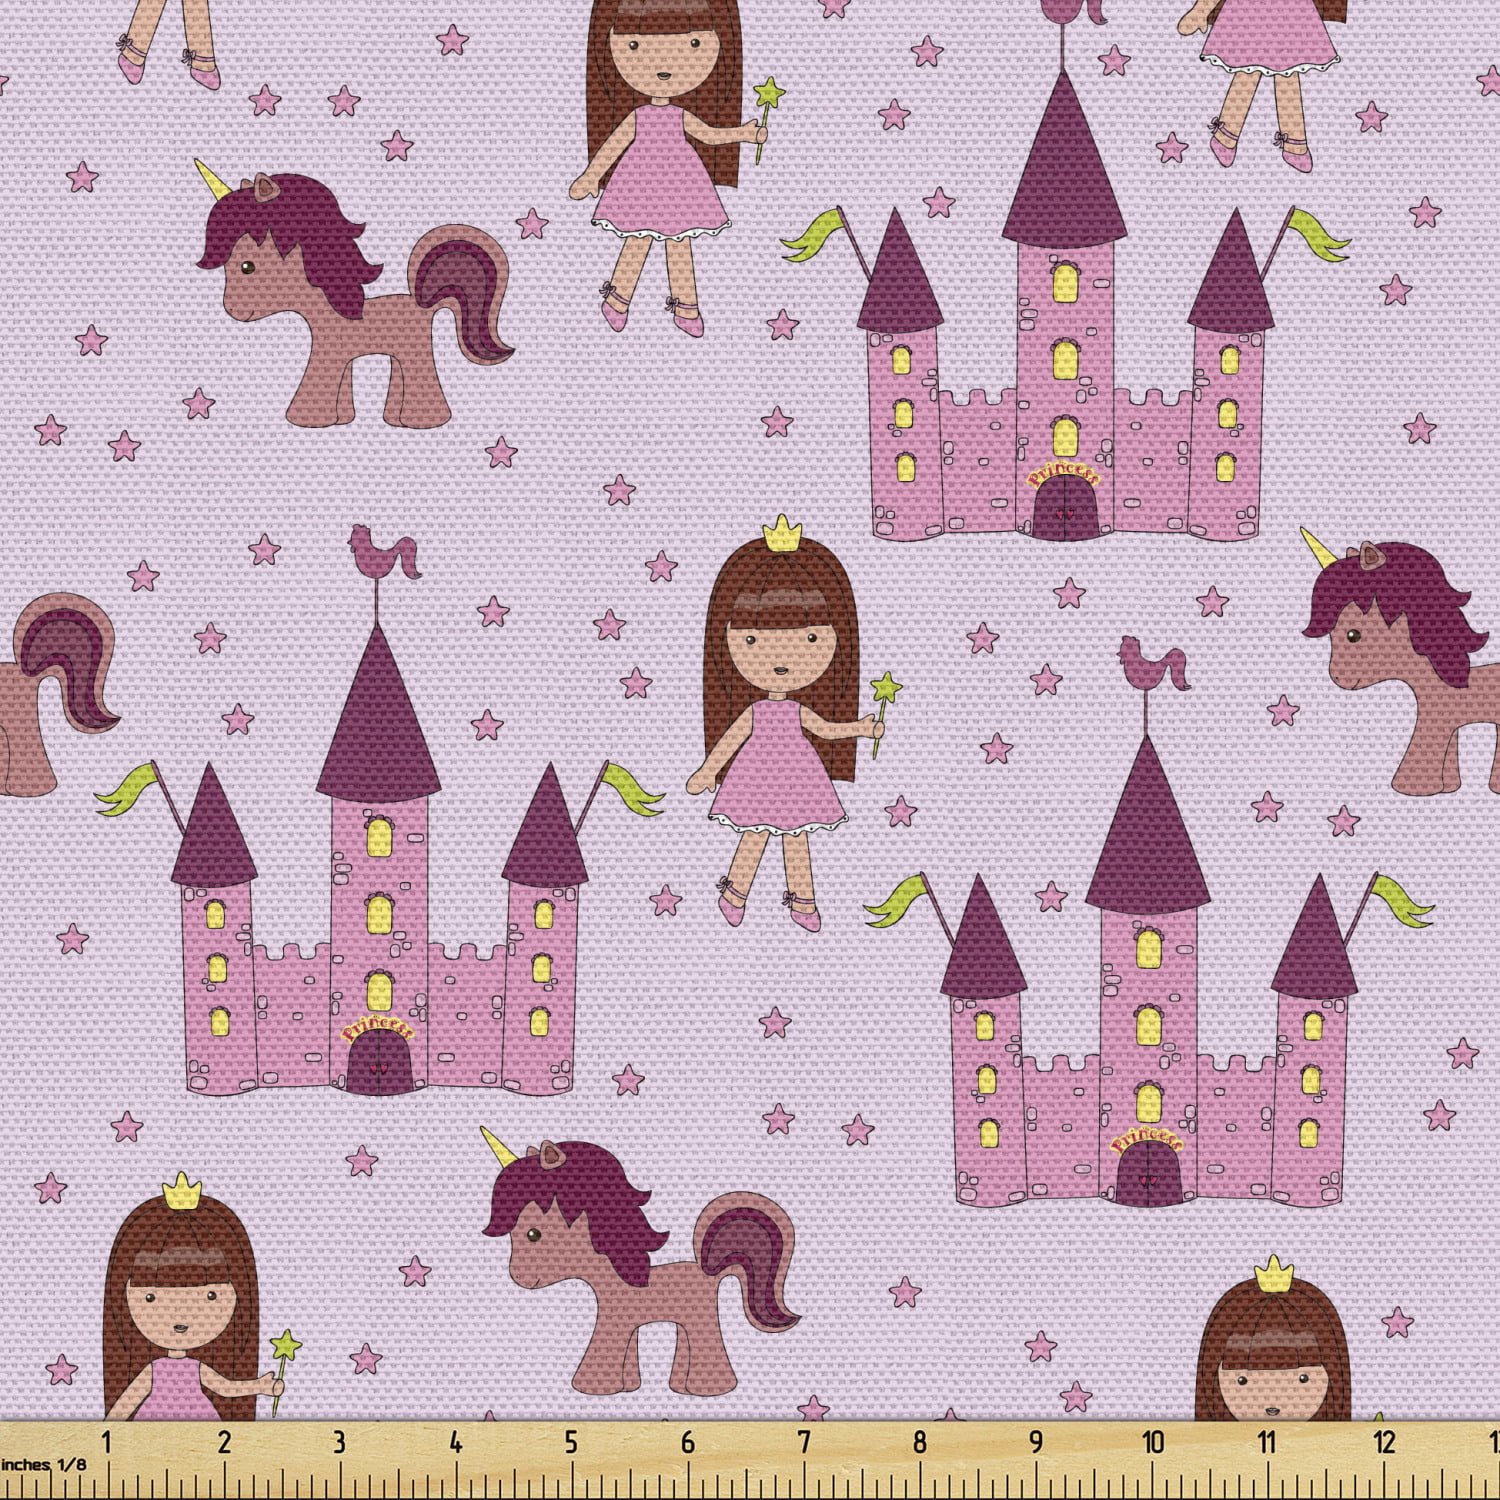 Fantasy Sofa Upholstery Fabric by the Yard, Cartoon with Castle Unicorn  Stars Background Cartoon Drawing Style, Decorative Fabric for DIY & Home  Accents, 2 Yards, Pale Mauve Brown Pink by Ambesonne -